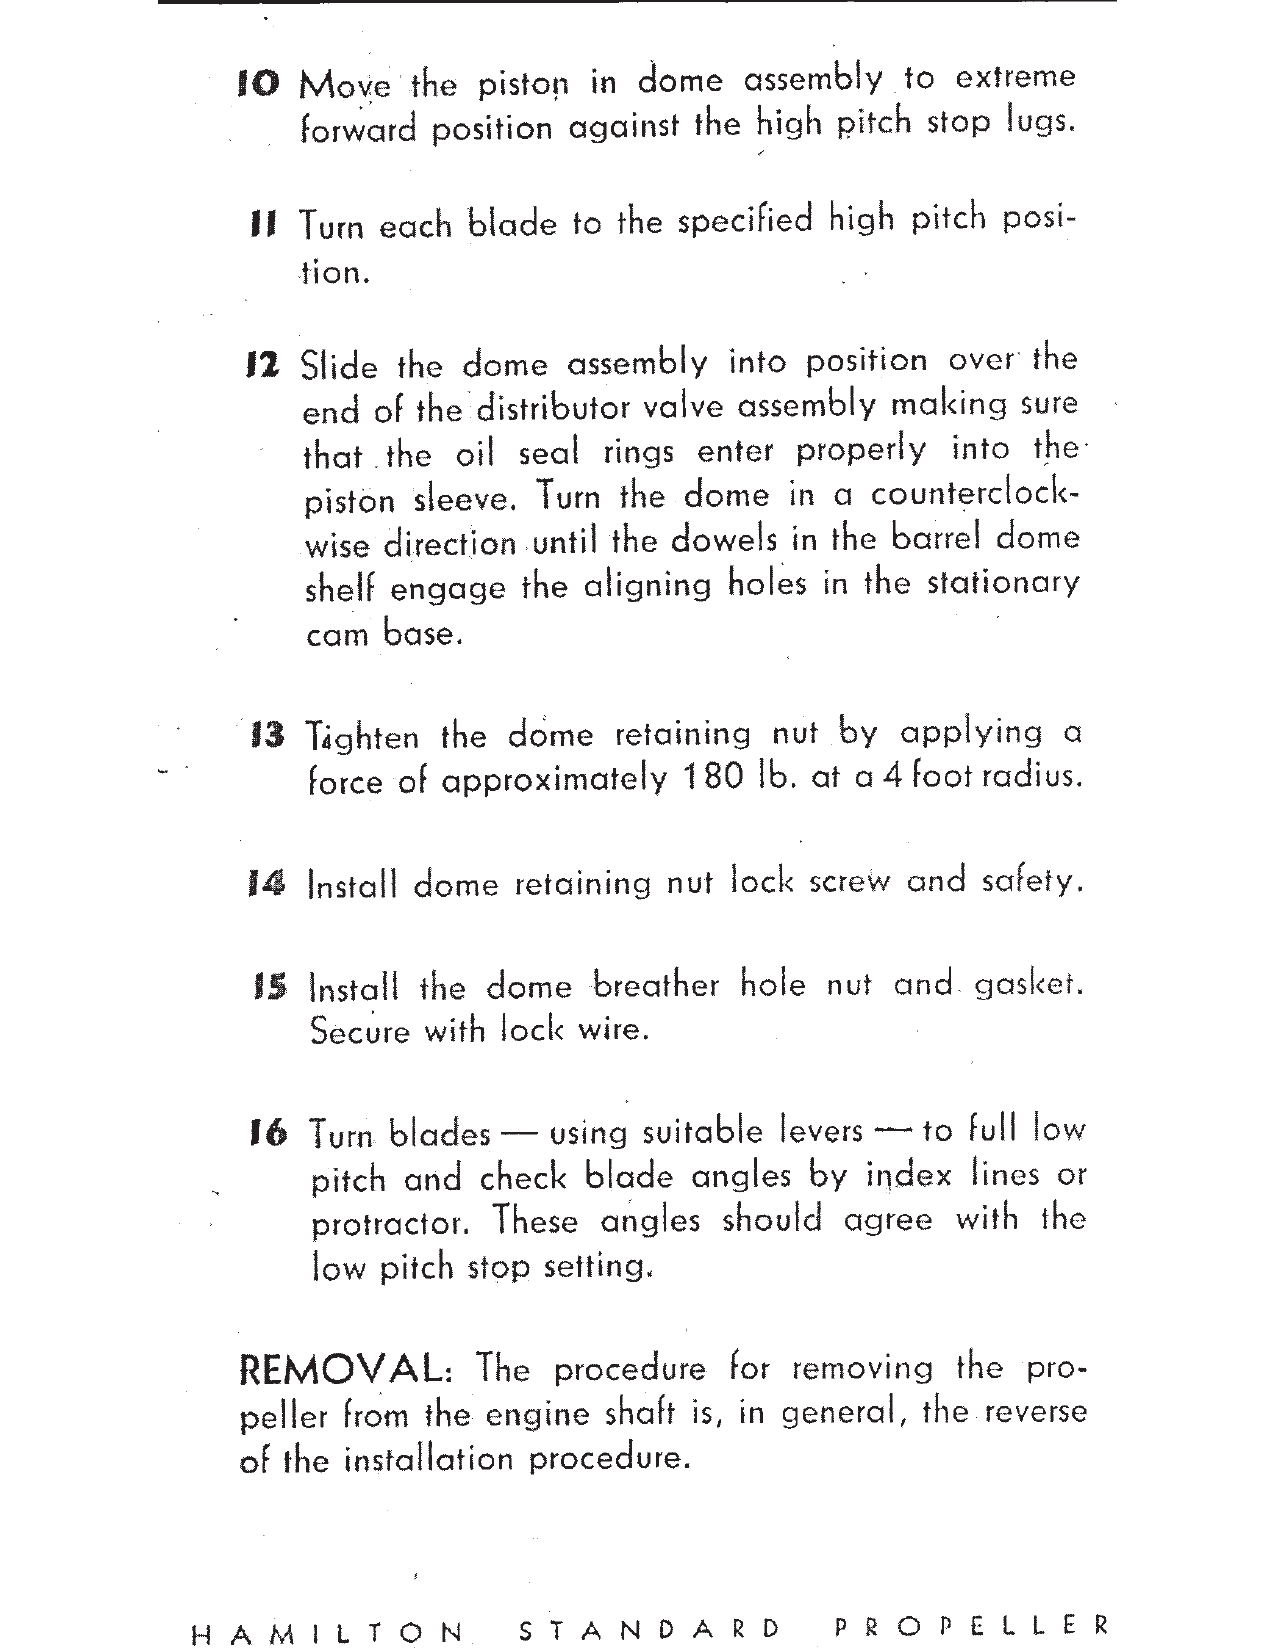 Sample page 14 from AirCorps Library document: Prop Tips - Hydromatic Propeller - Hamilton Standard Propellers